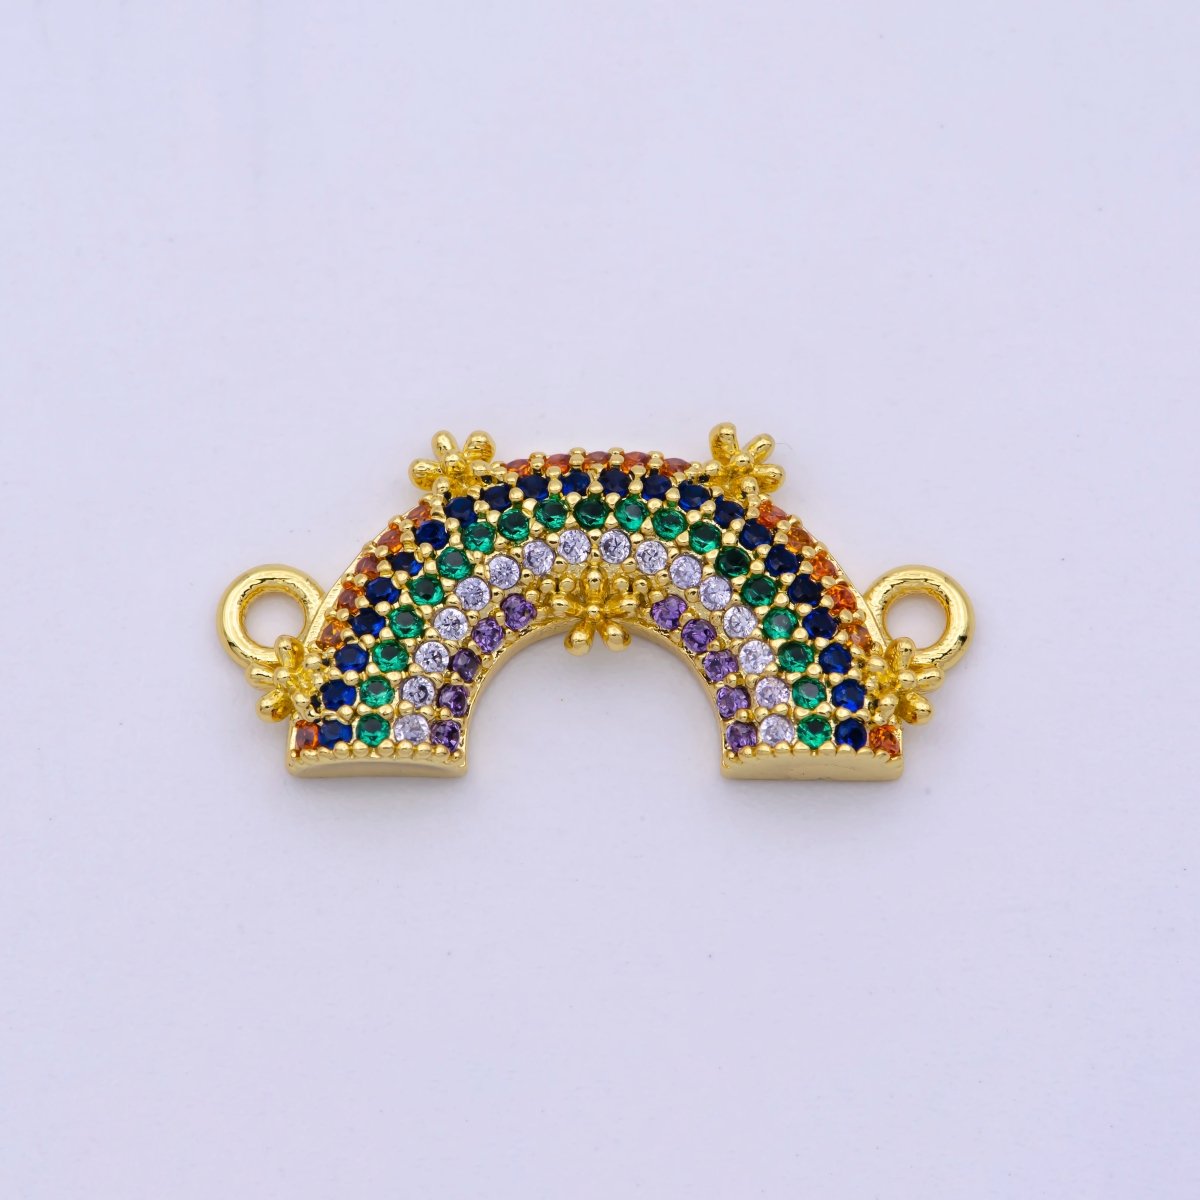 Dainty 24K Gold Filled Colorful Cz Gold Rainbow Charm Connector for Necklace Component N-067 - DLUXCA